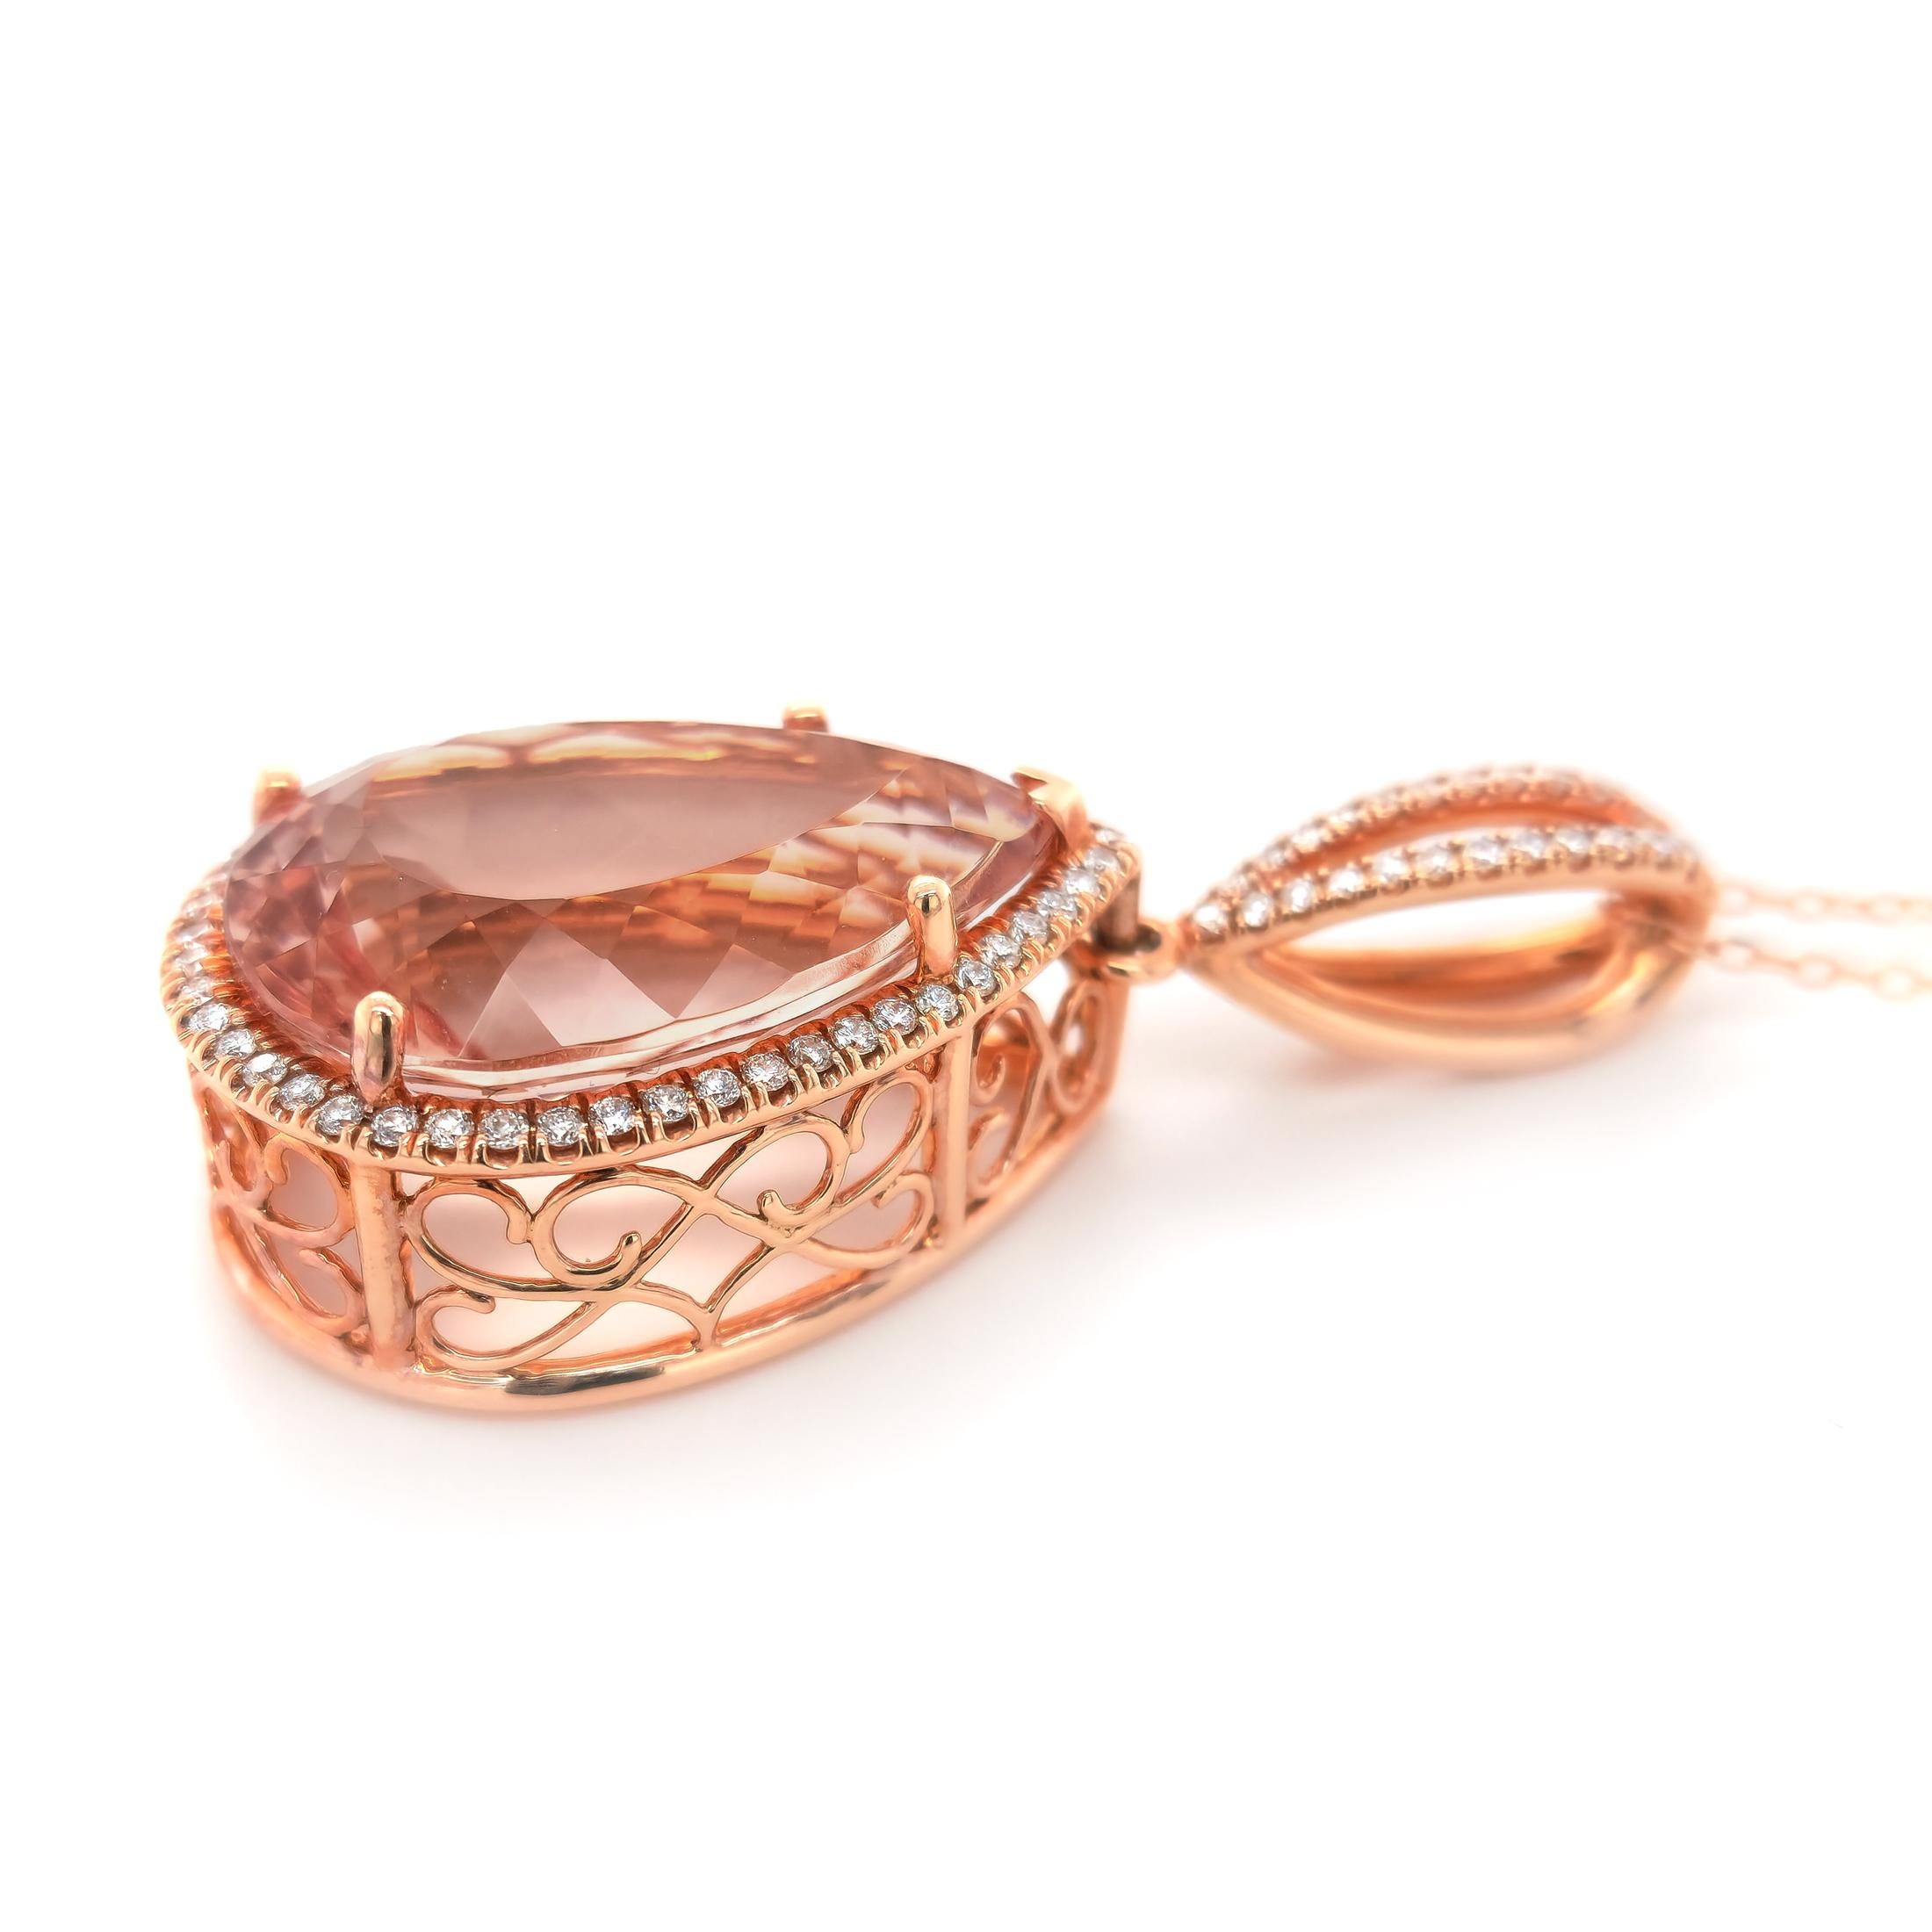 Lovely gemstone set in rose gold, this 16.30 carat mystical Morganite adds a touch of fresh sexiness to this pendant. Set in 14K Gold, there will be no denying the durability of this pendant paired with the everlasting salmon colored beryl. Although